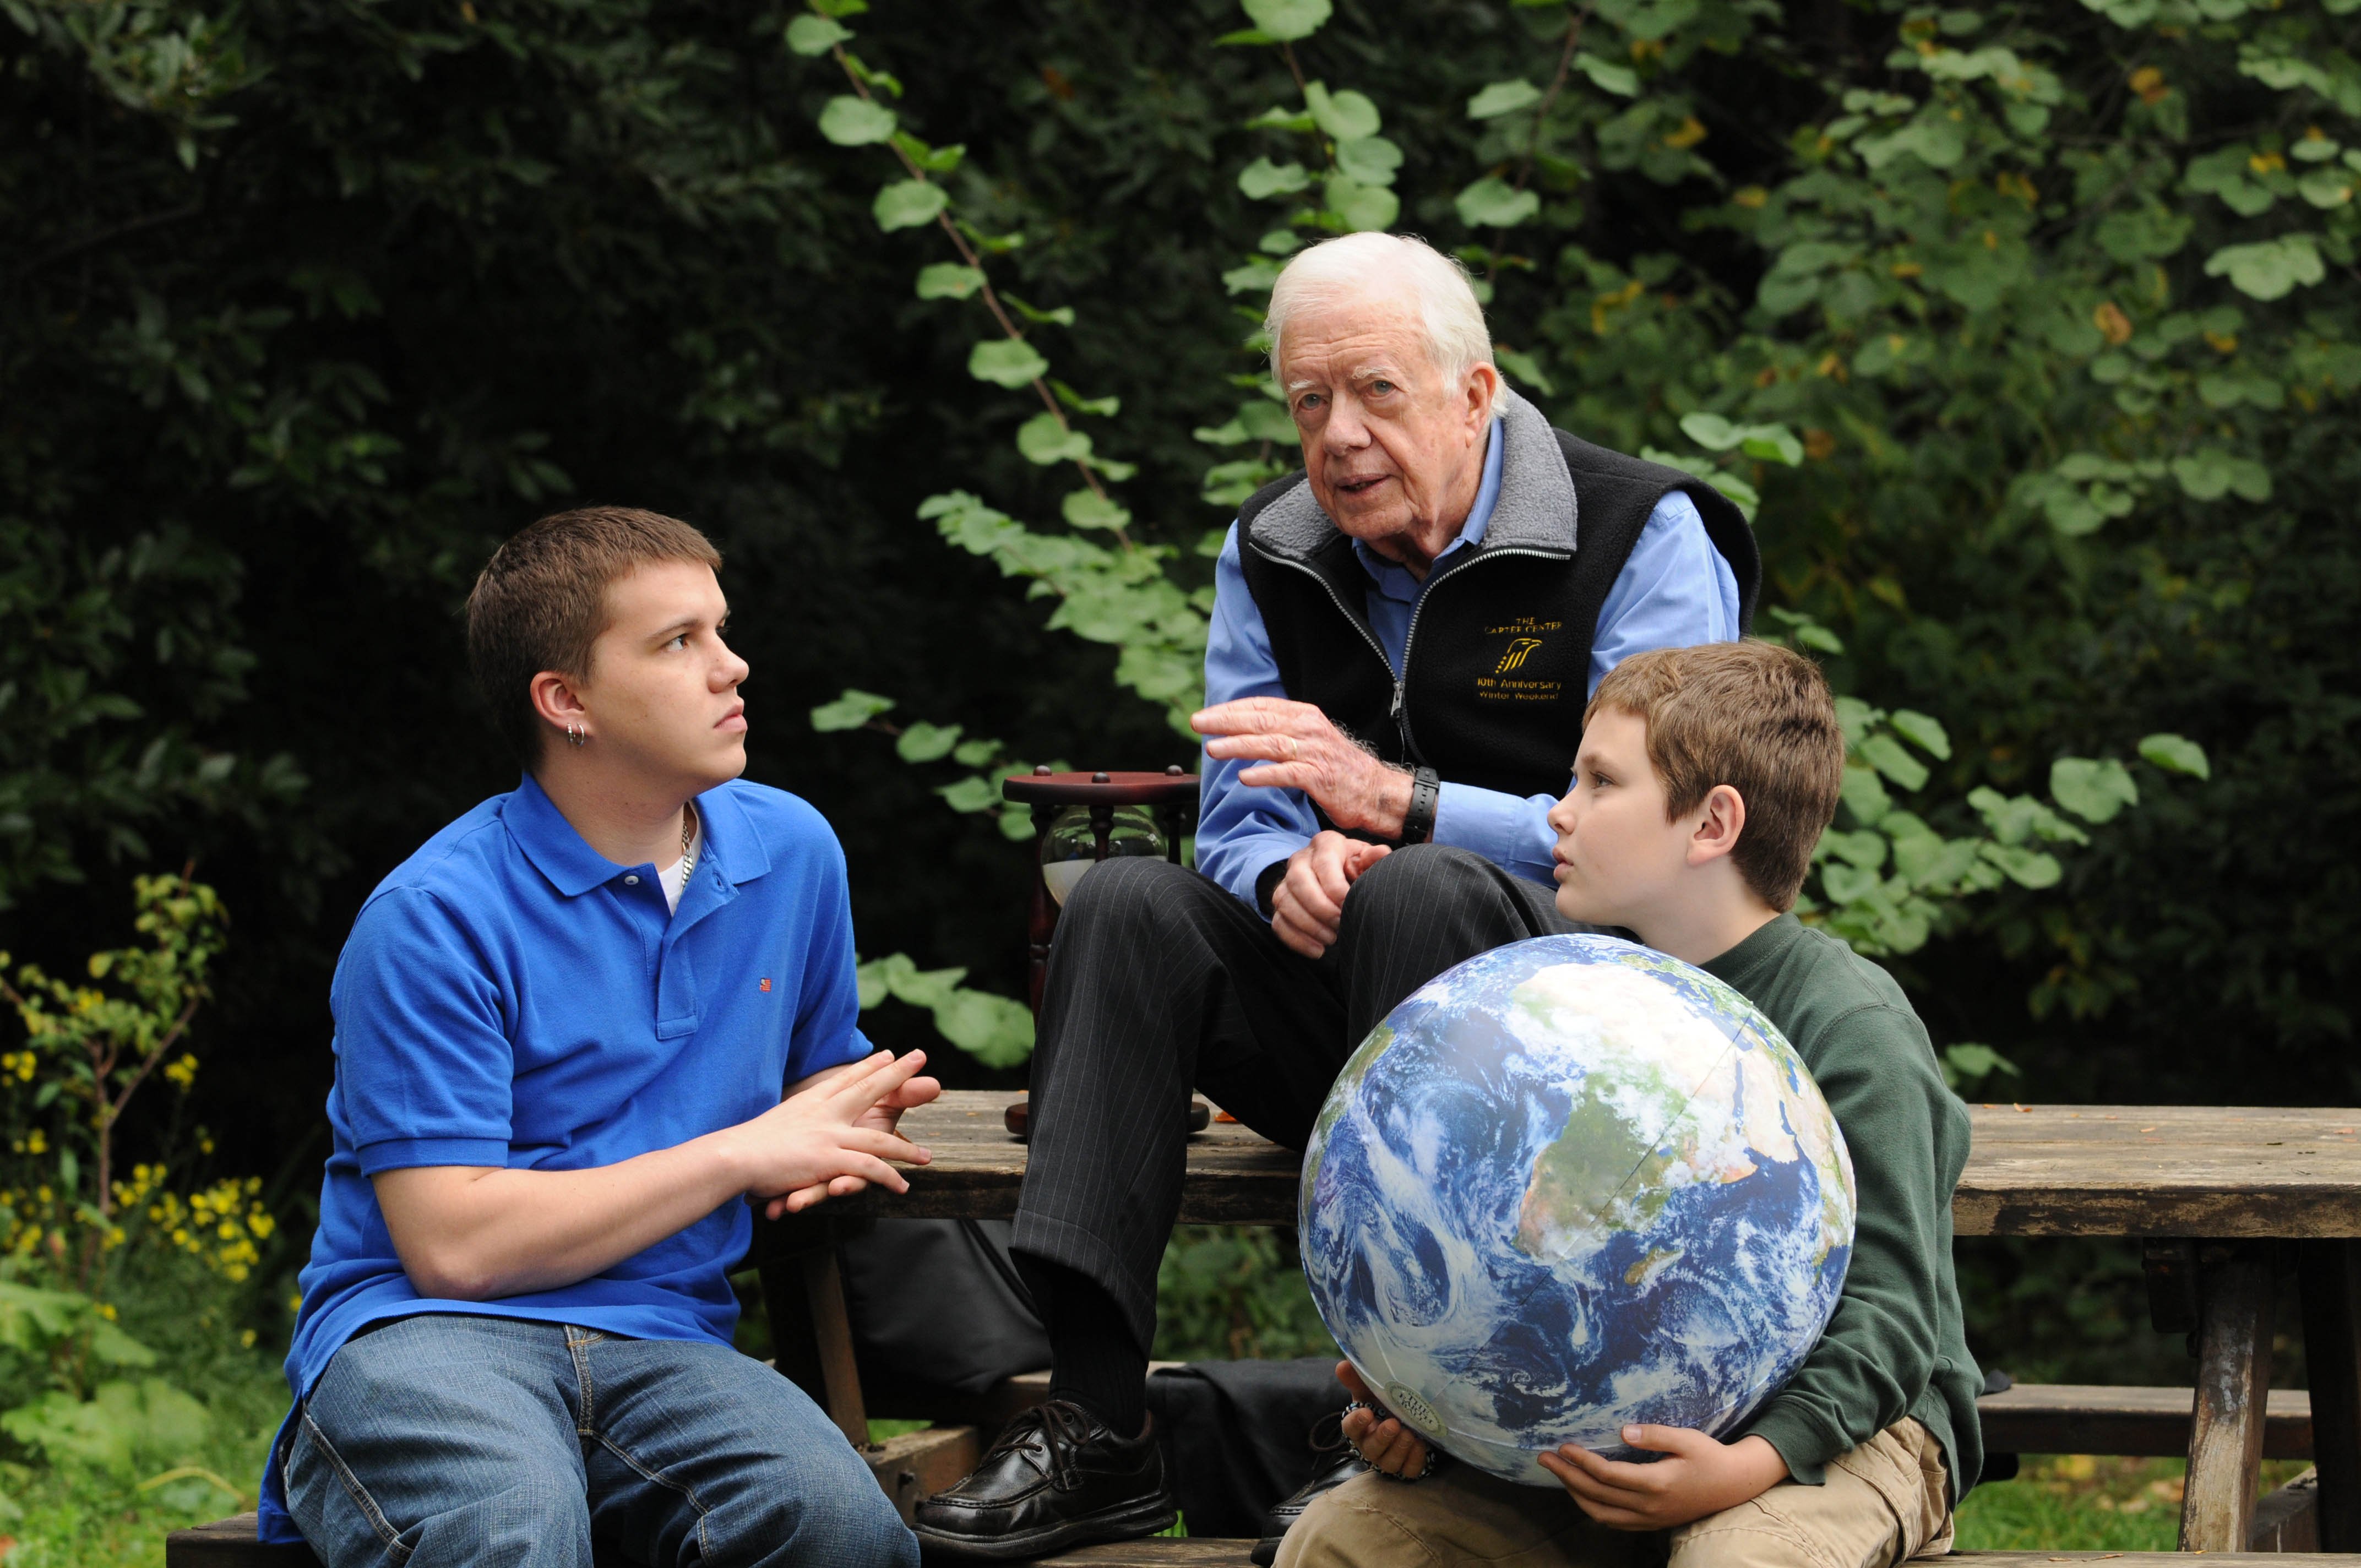 Jimmy Carter walks with his grandsons Jeremy Carter (R), 22, and Hugo Wentzel, 10 during a picnic event on October 31, 2009 in Istanbul, Turkey. | Source: Getty Images